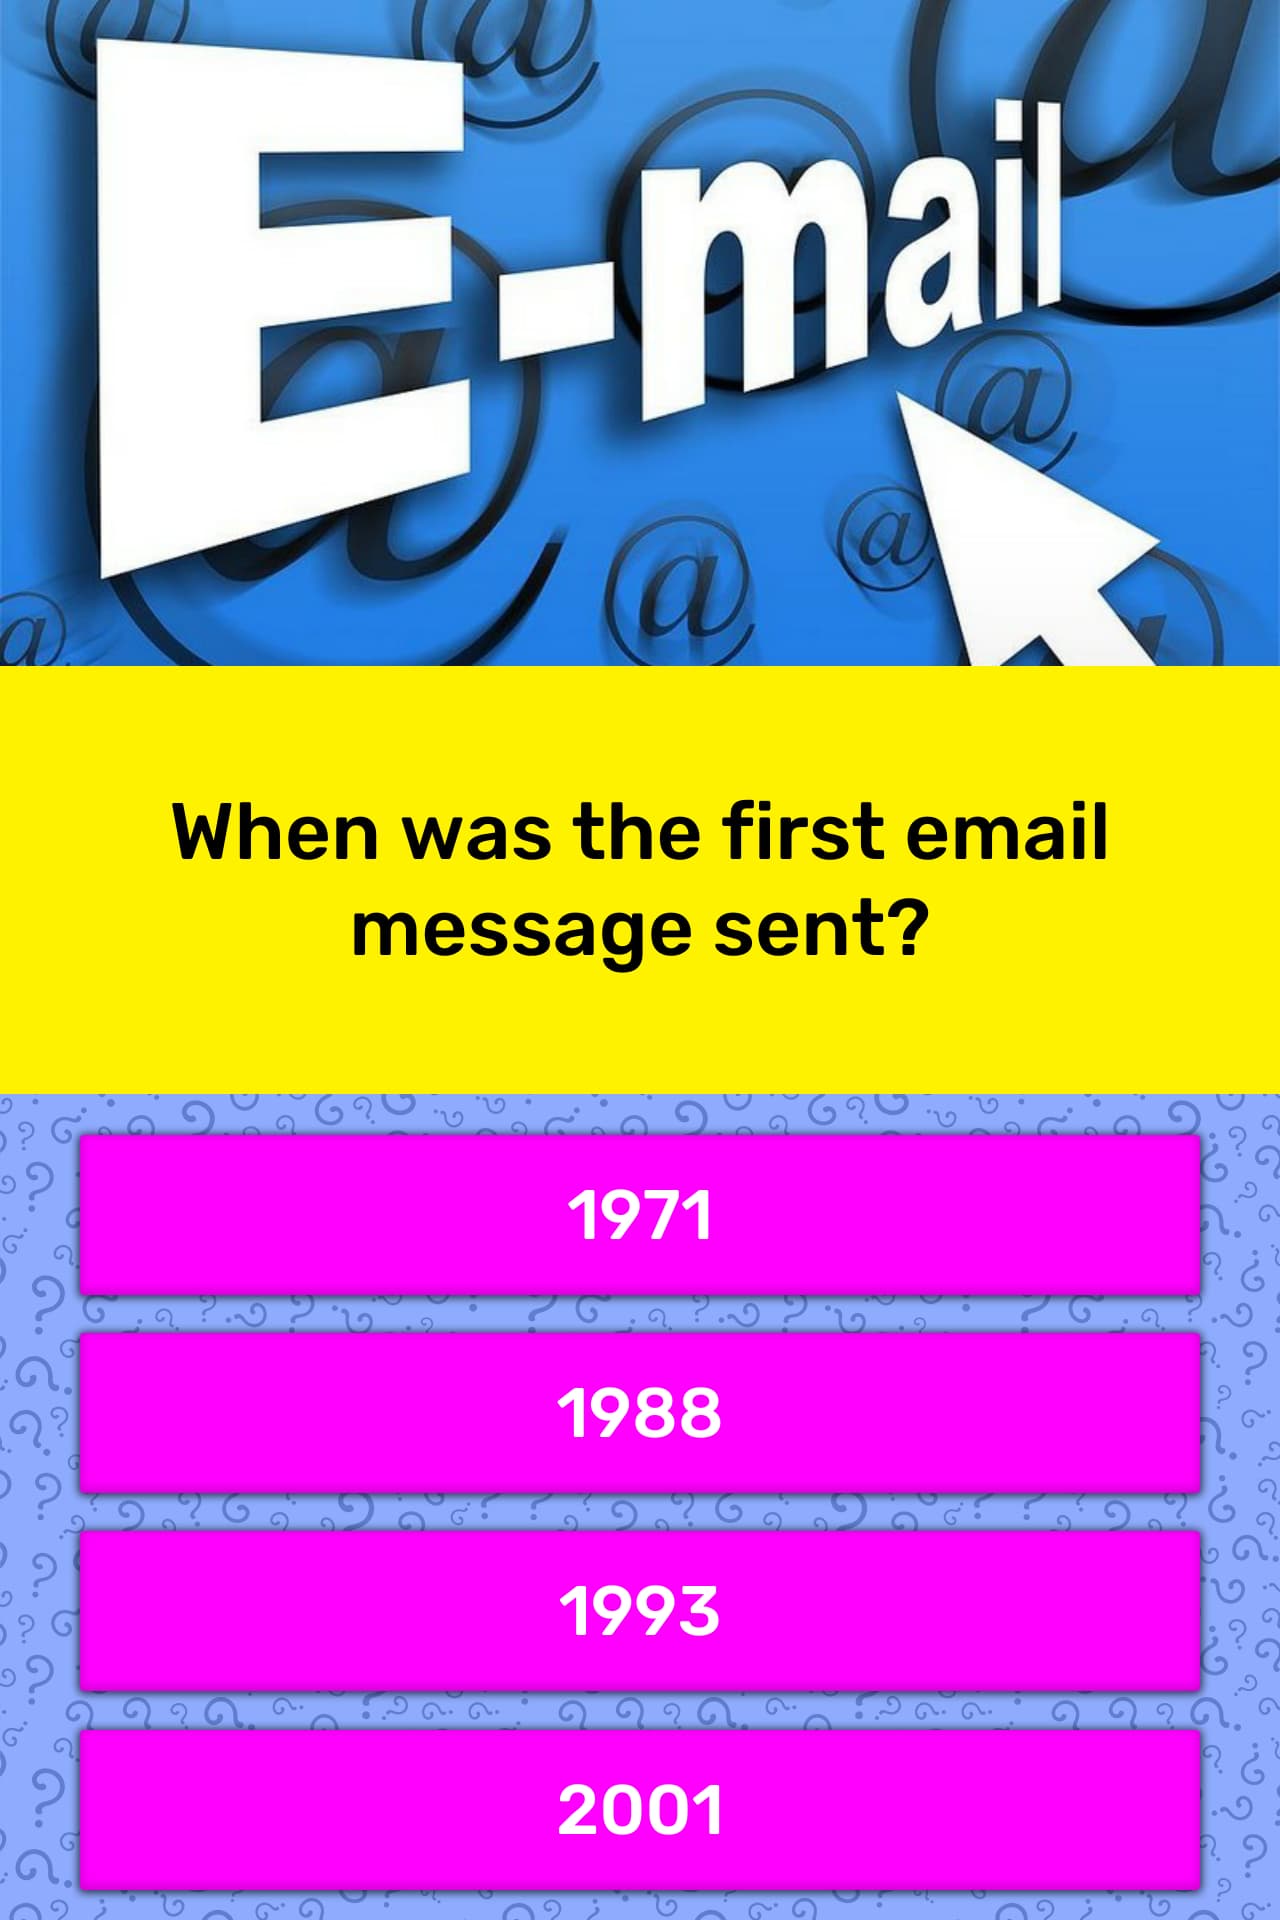 when-was-the-first-email-message-sent-trivia-answers-quizzclub